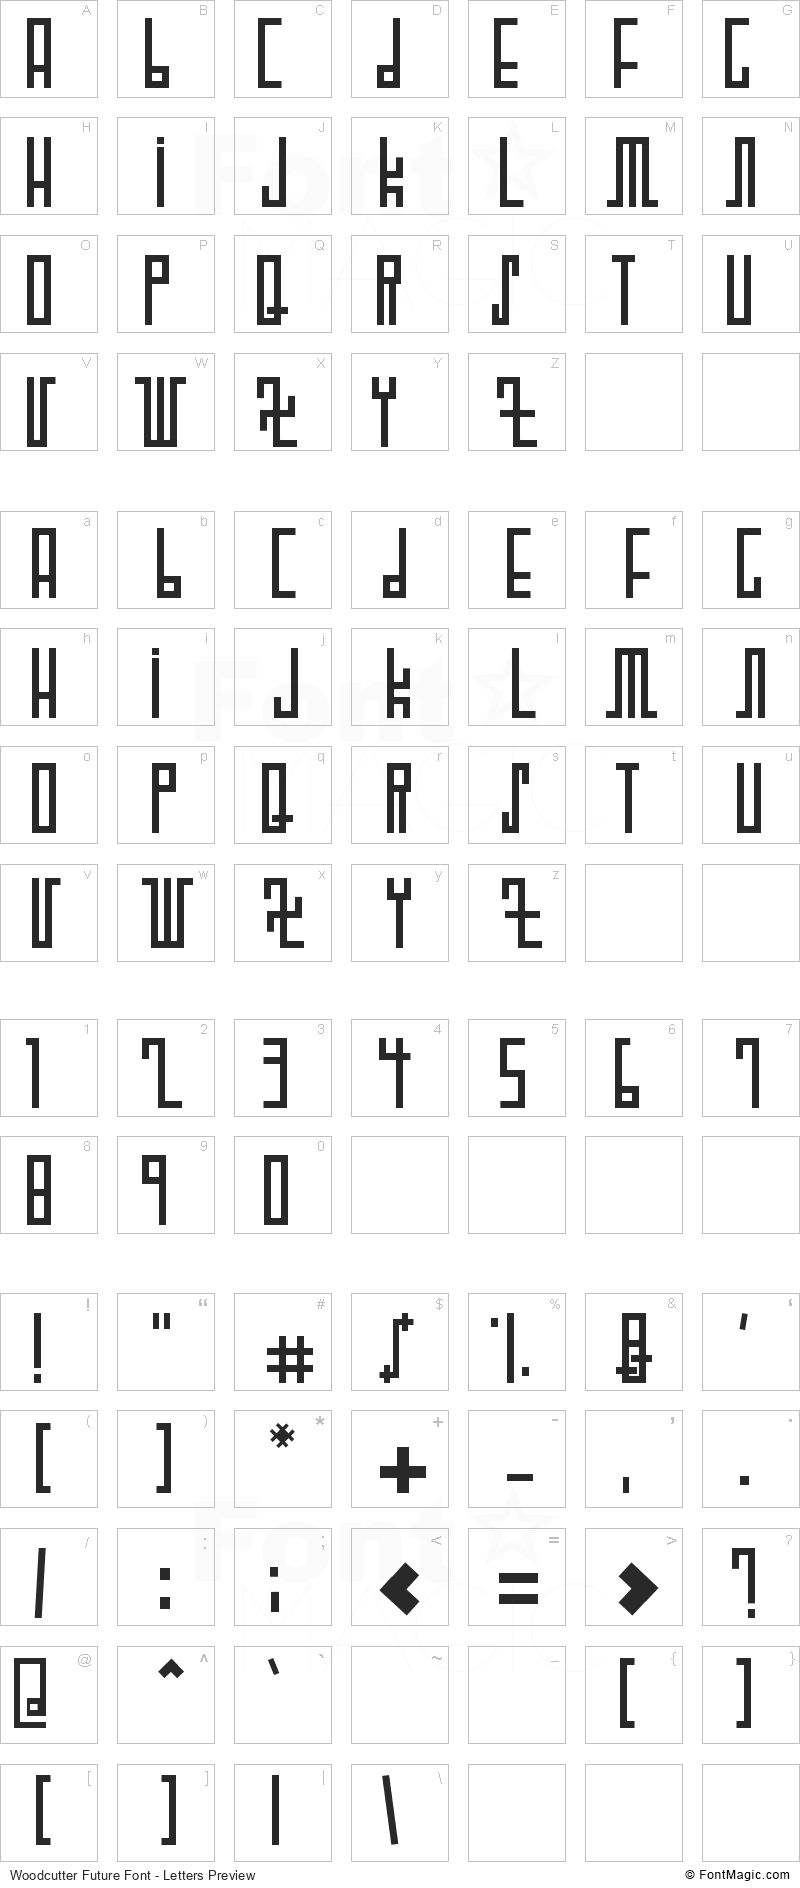 Woodcutter Future Font - All Latters Preview Chart